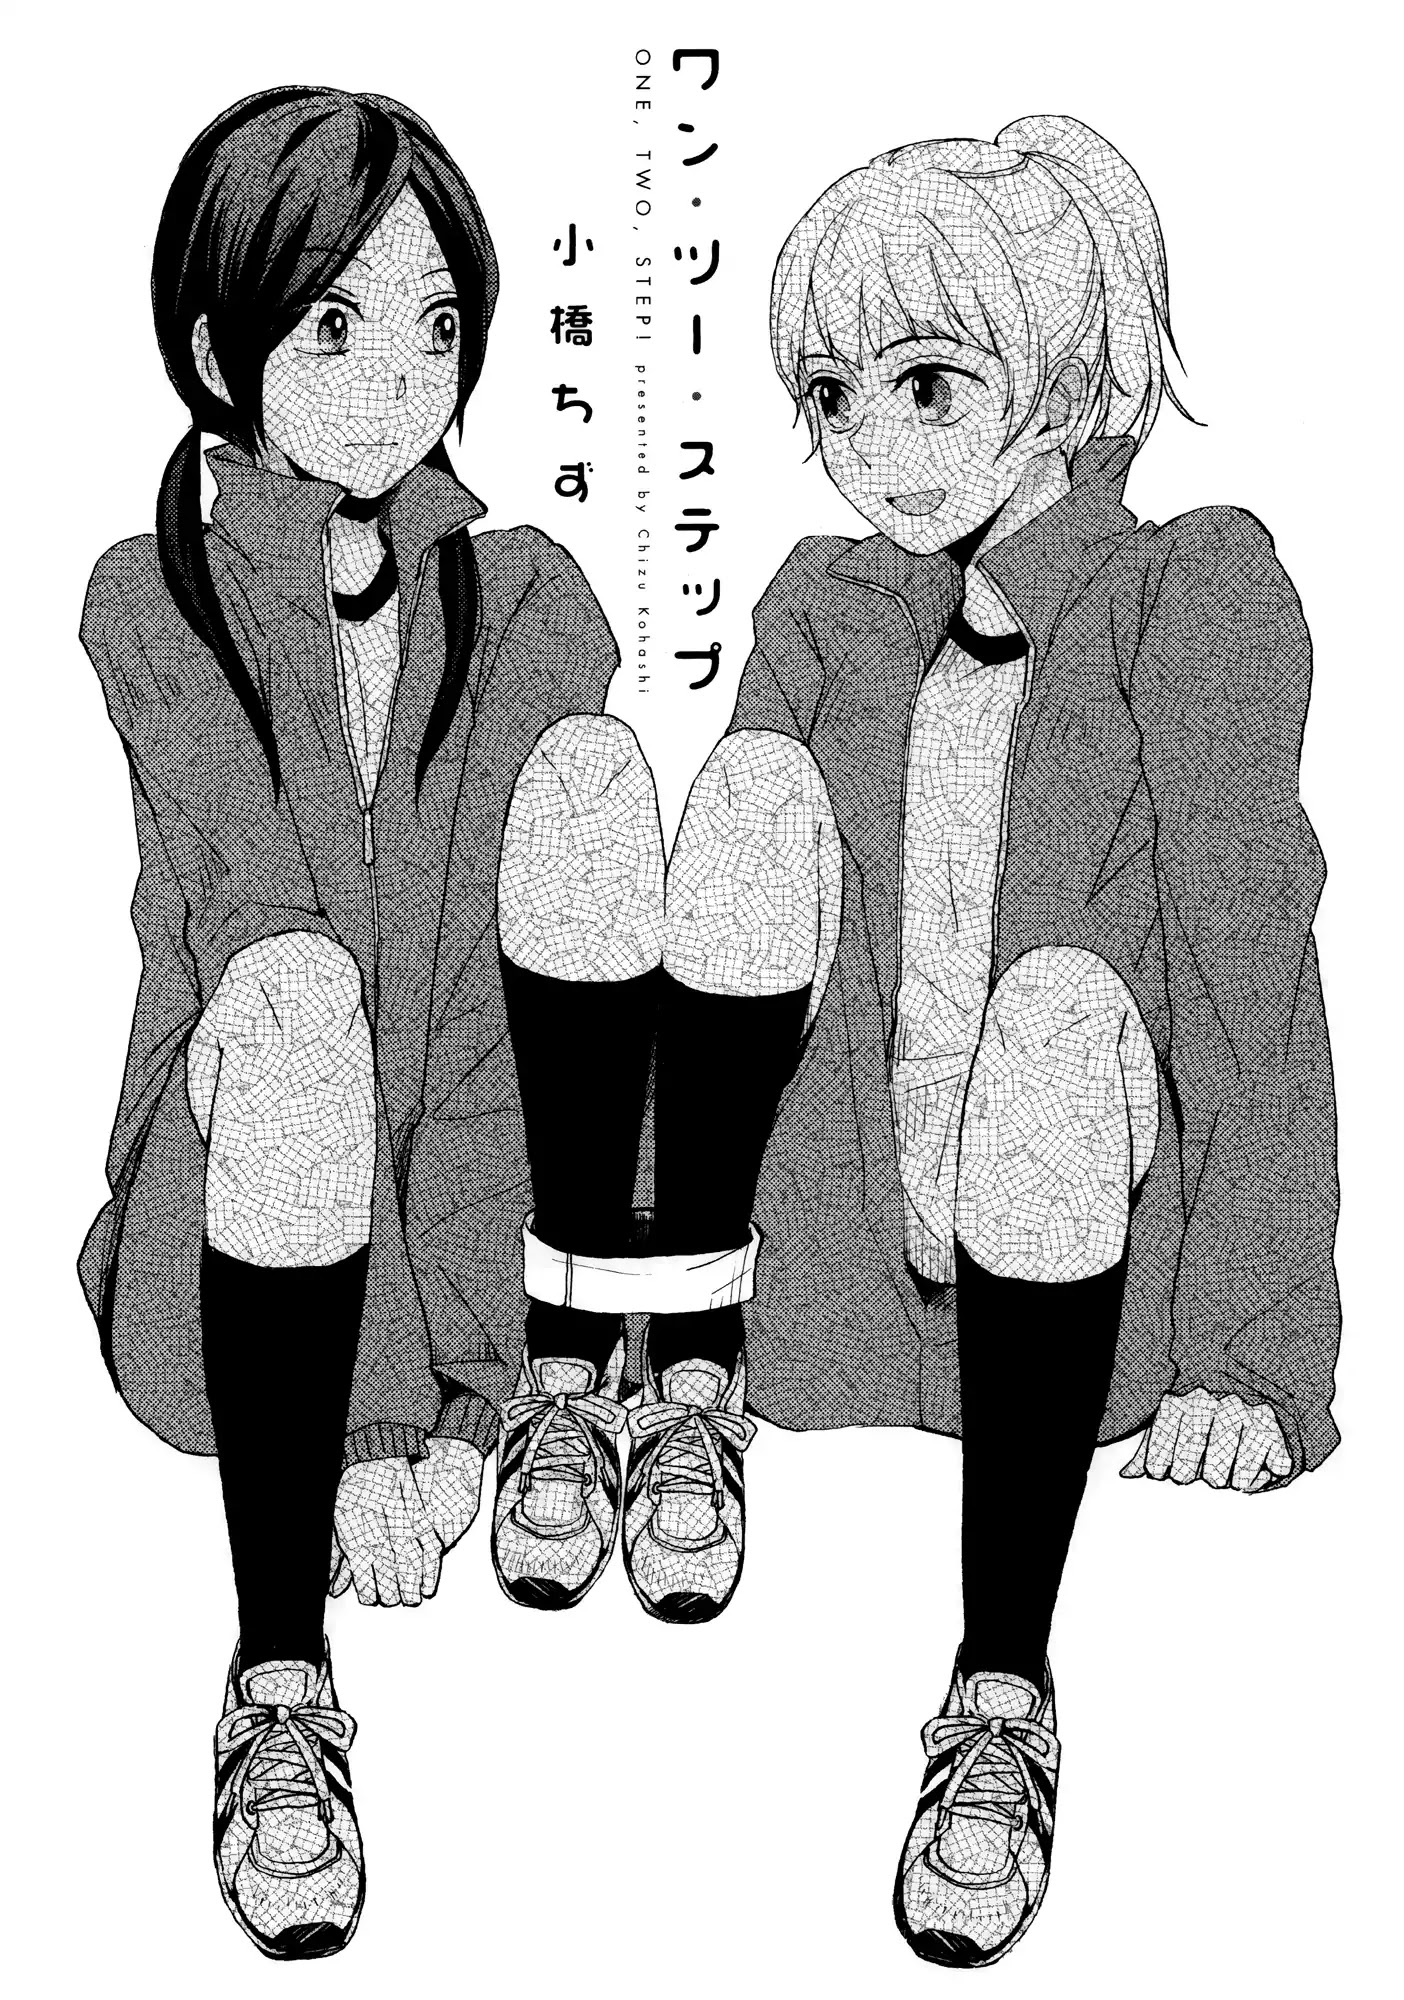 Houkago! (Anthology) Vol.1 Chapter 19: One Two Step (Chizu Kohashi) - Picture 1